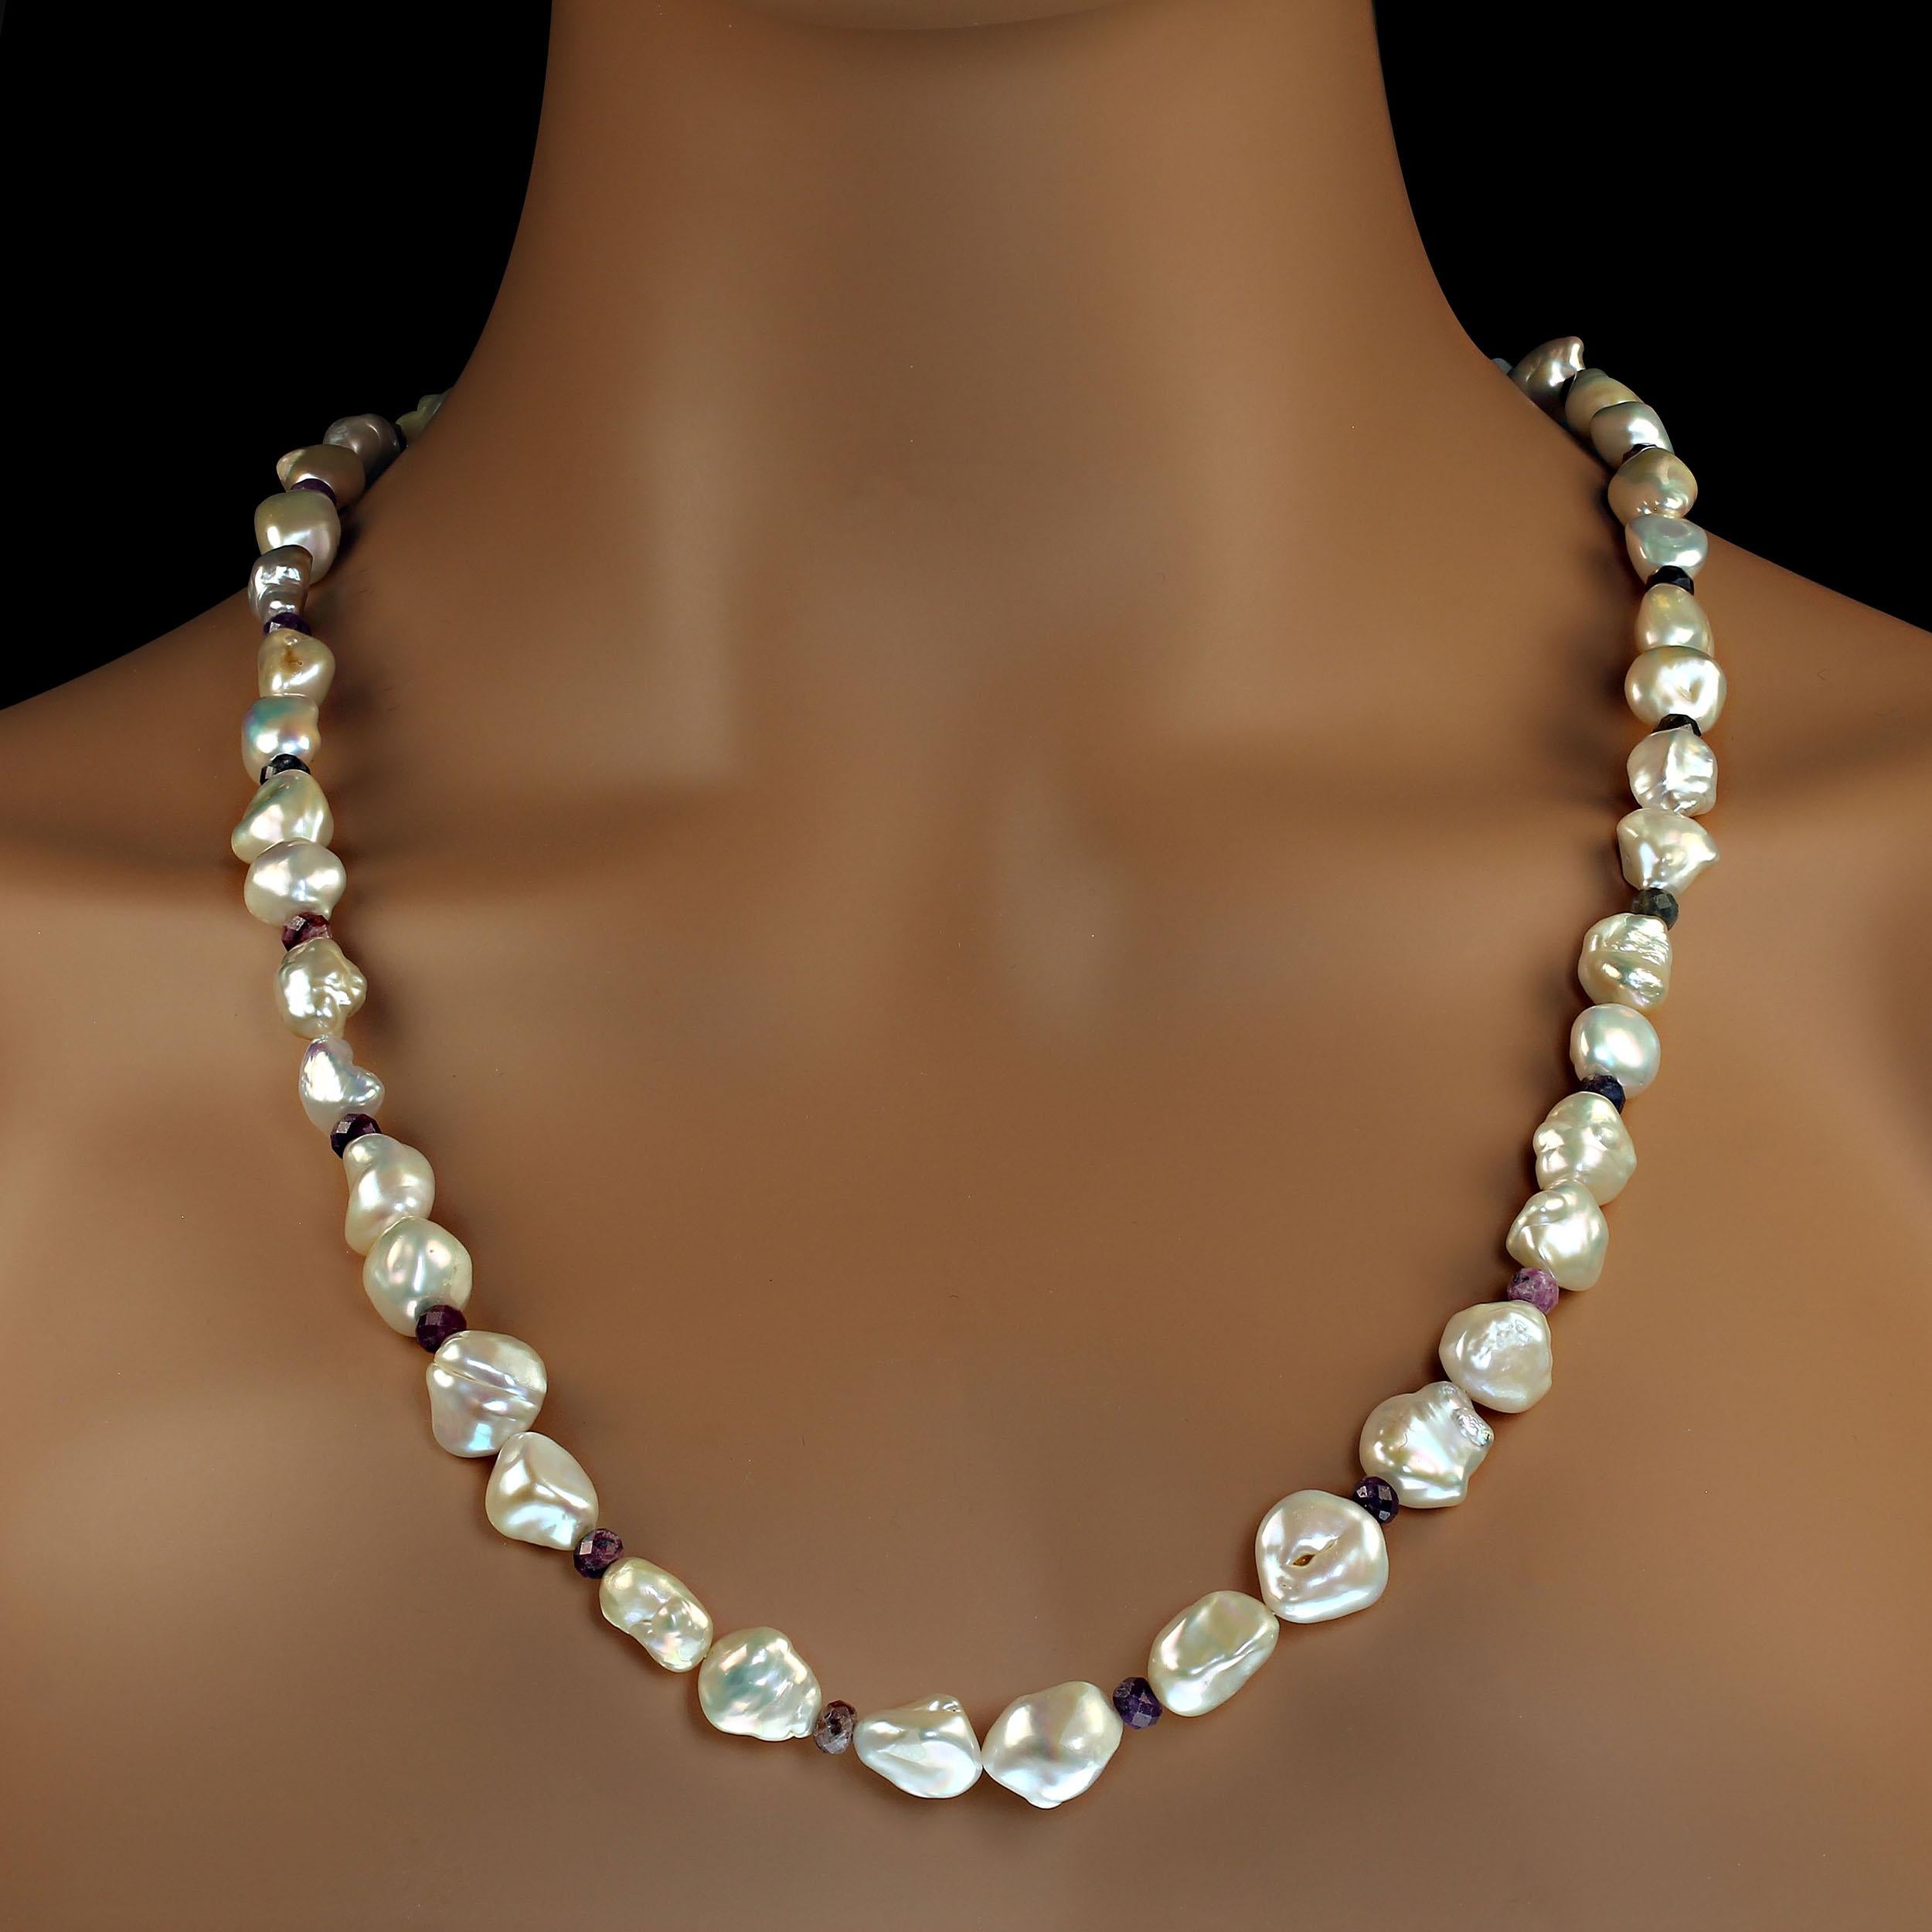 Glowing white freshwater pearl necklace with matte multi color sapphire accents. The white freshwater pearls are from the 2nd harvest. They have a special glow and luster.  They juxtapose the matte finish of the 6mm multi color sapphire rondelles. 